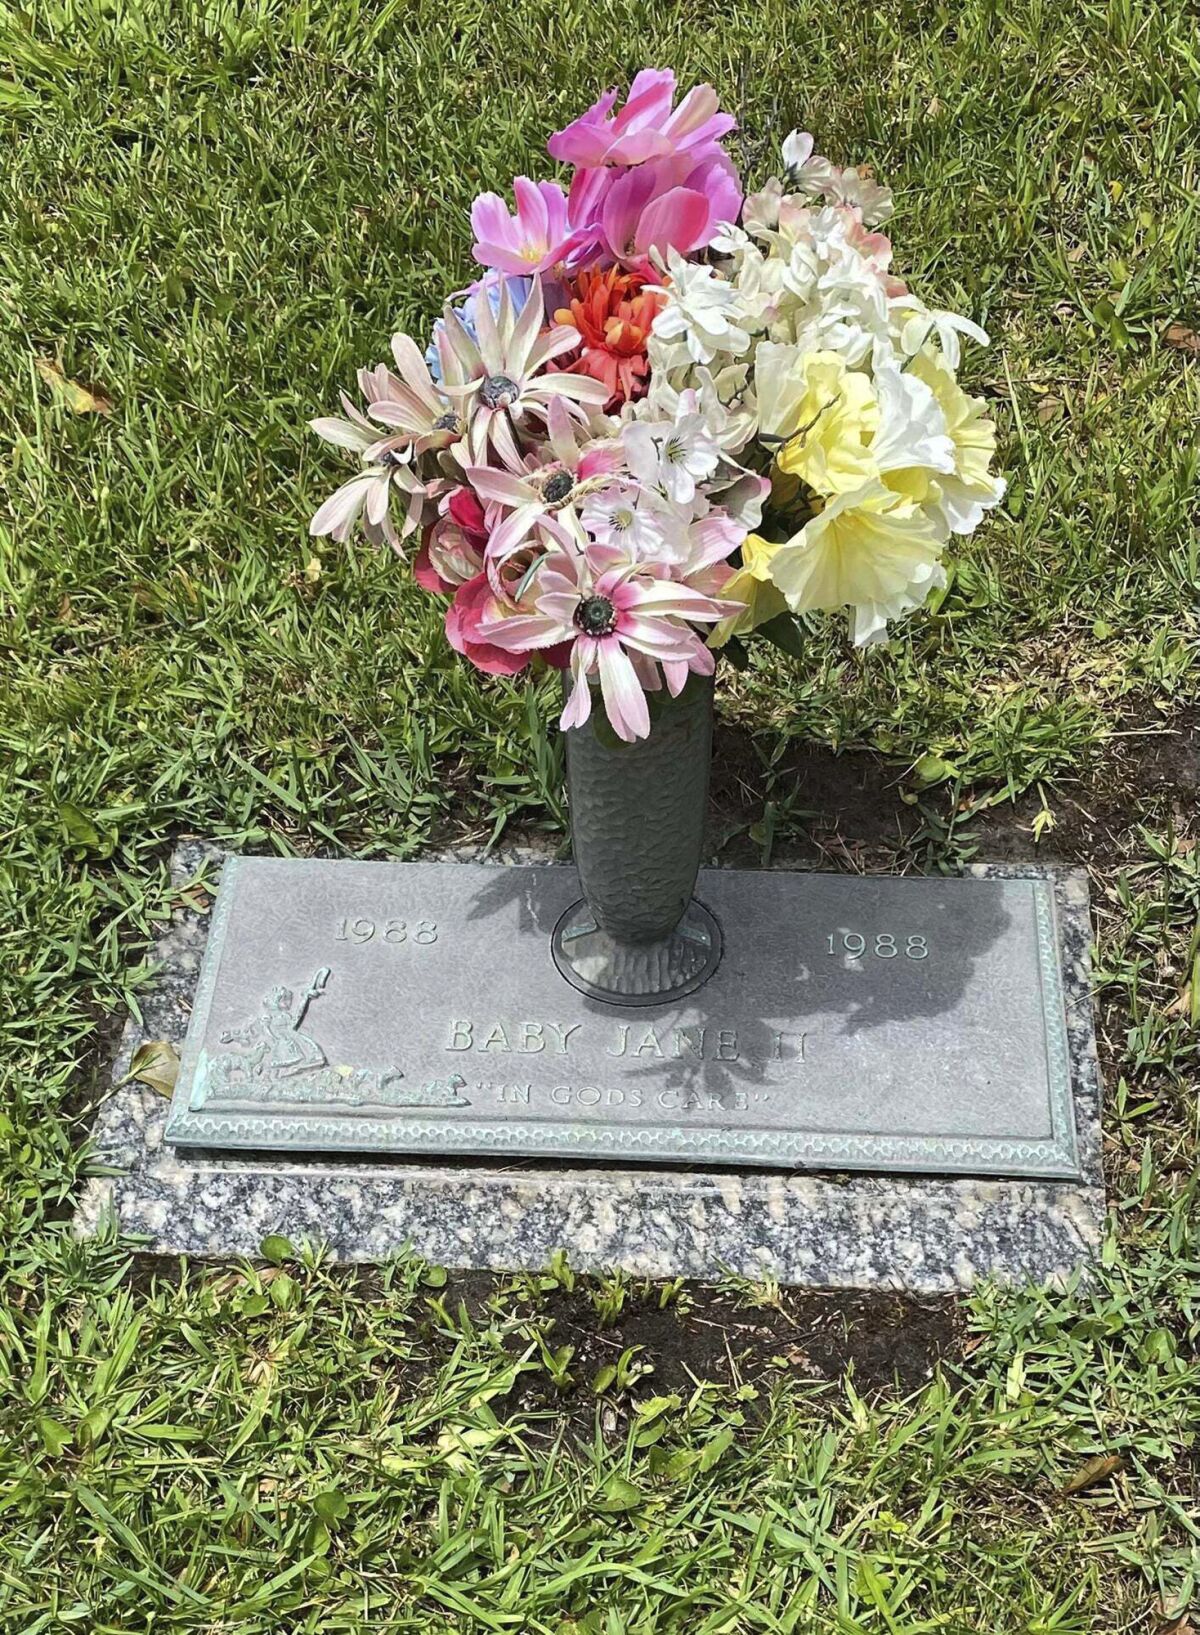 This photo provided by the Jackson County Sheriff’s Department shows the grave marker of Baby Jane II at Jackson County Memorial Park in Pascagoula, Mississippi. The weeks-old infant, found in the Pascagoula River in 1988, was never identified. She was buried by community members next to the grave site of another unidentified infant found in a Jackson County river in the 1980s called Baby Jane. (Matt Hoggatt/Jackson County Sheriff’s Department via AP)